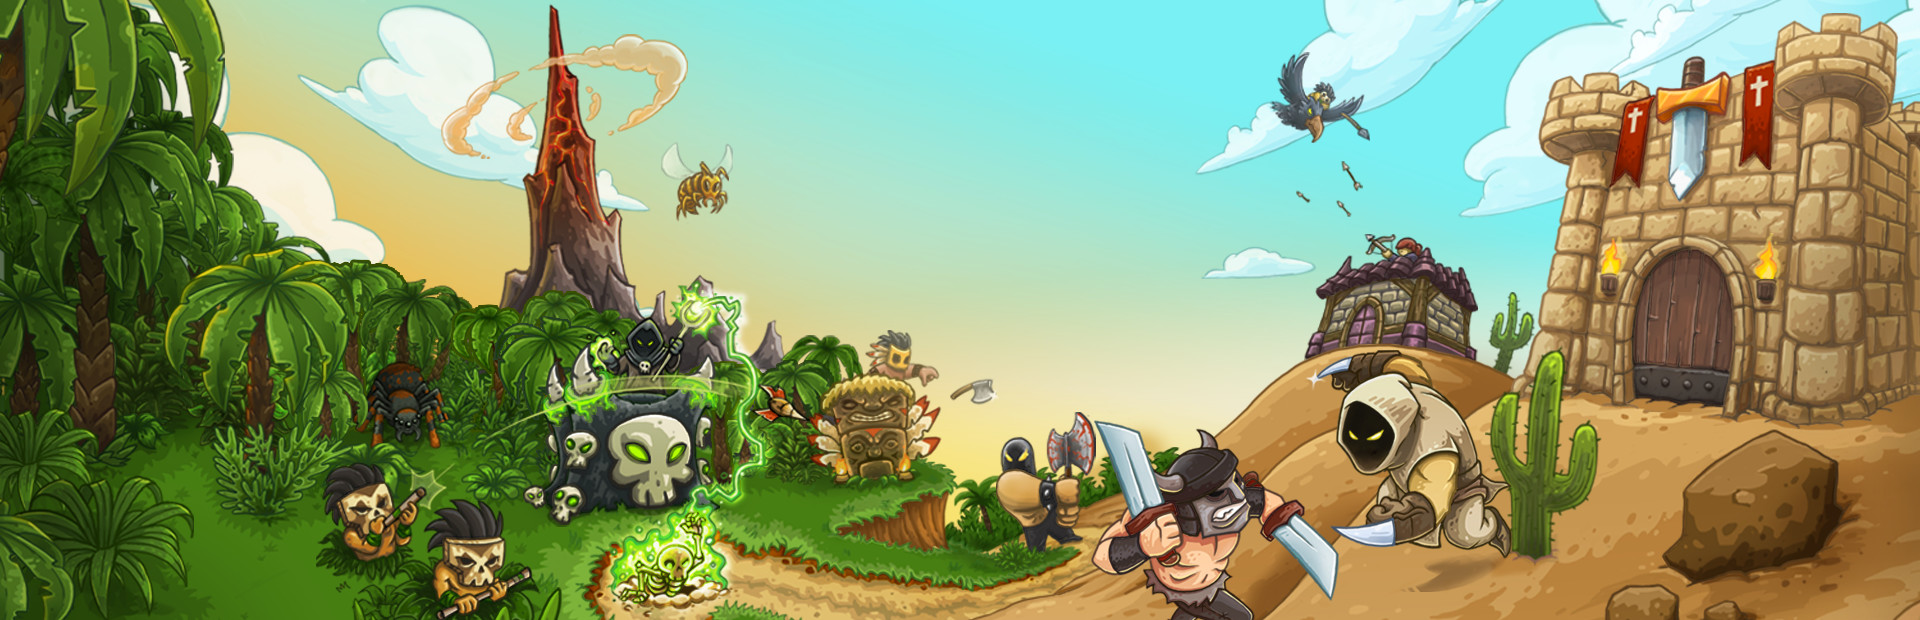 Kingdom Rush Frontiers - Tower Defense cover image